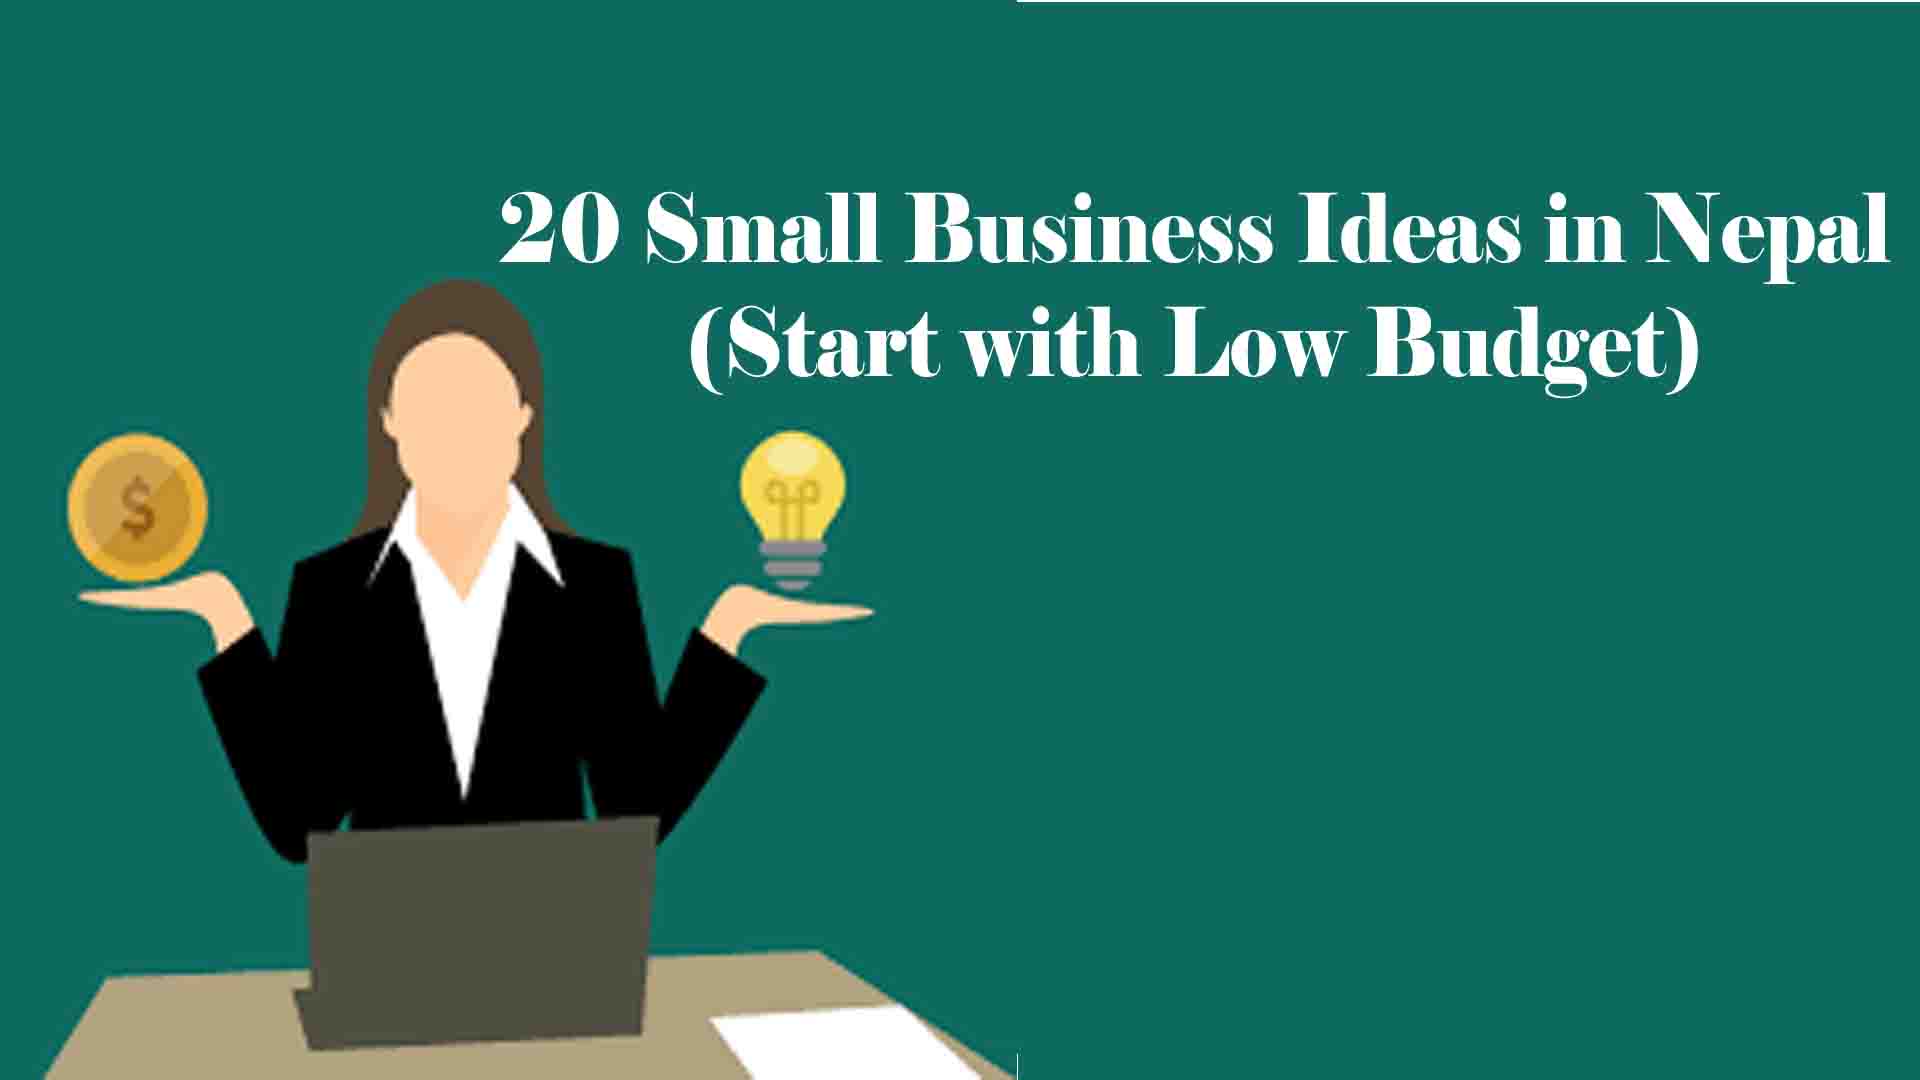 20 Small Business Ideas in Nepal ‣ Start with Low Budget